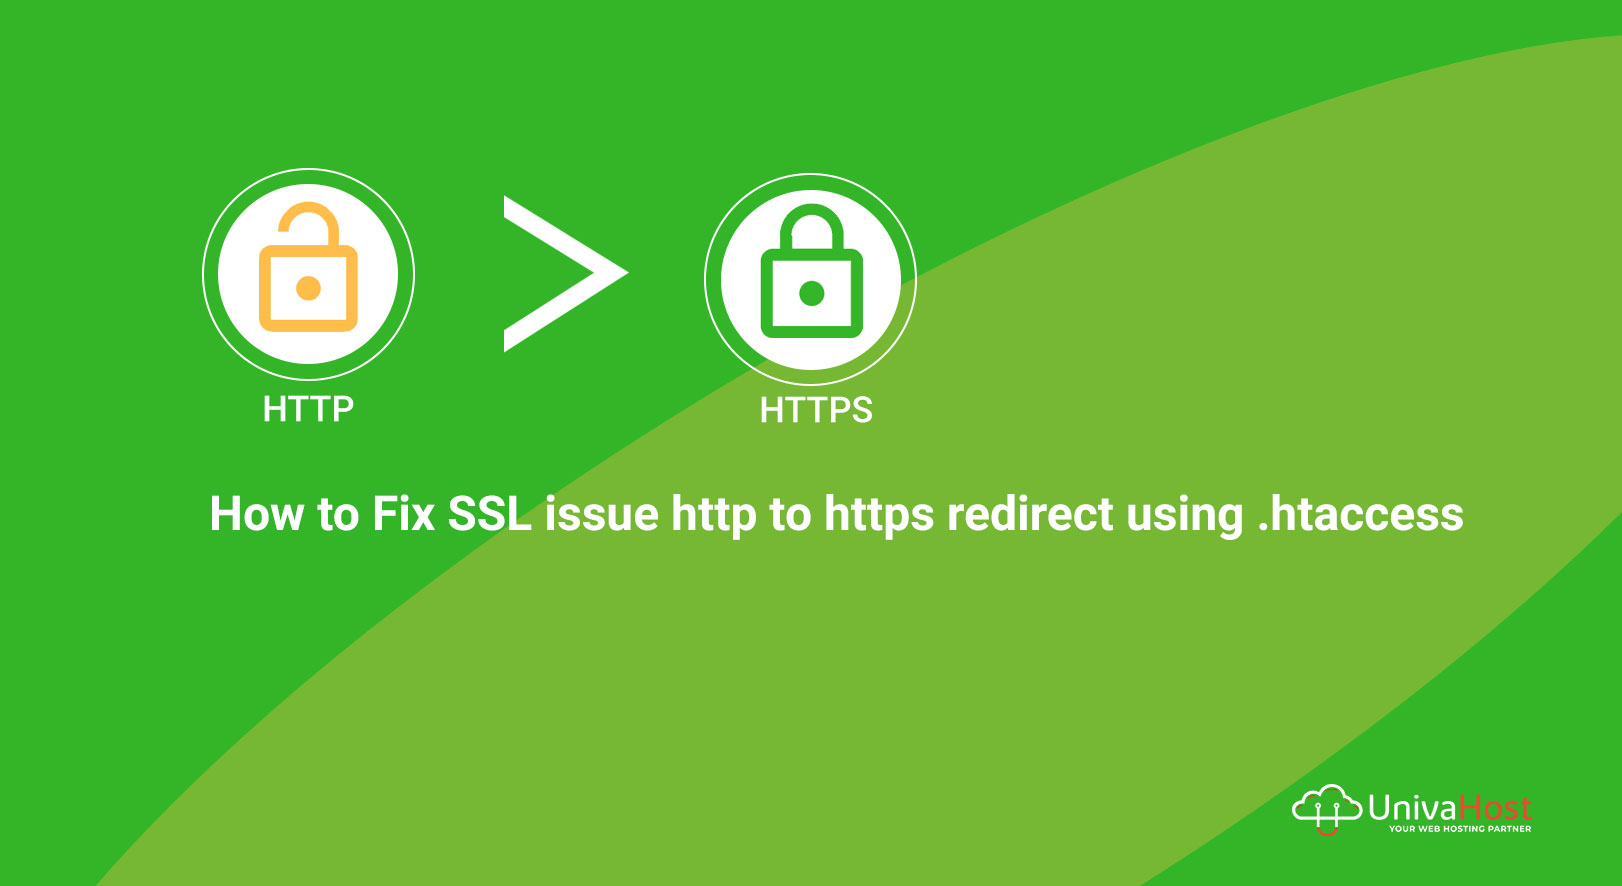 How To Fix Ssl Issue Http To Https Redirect Using .Htaccess